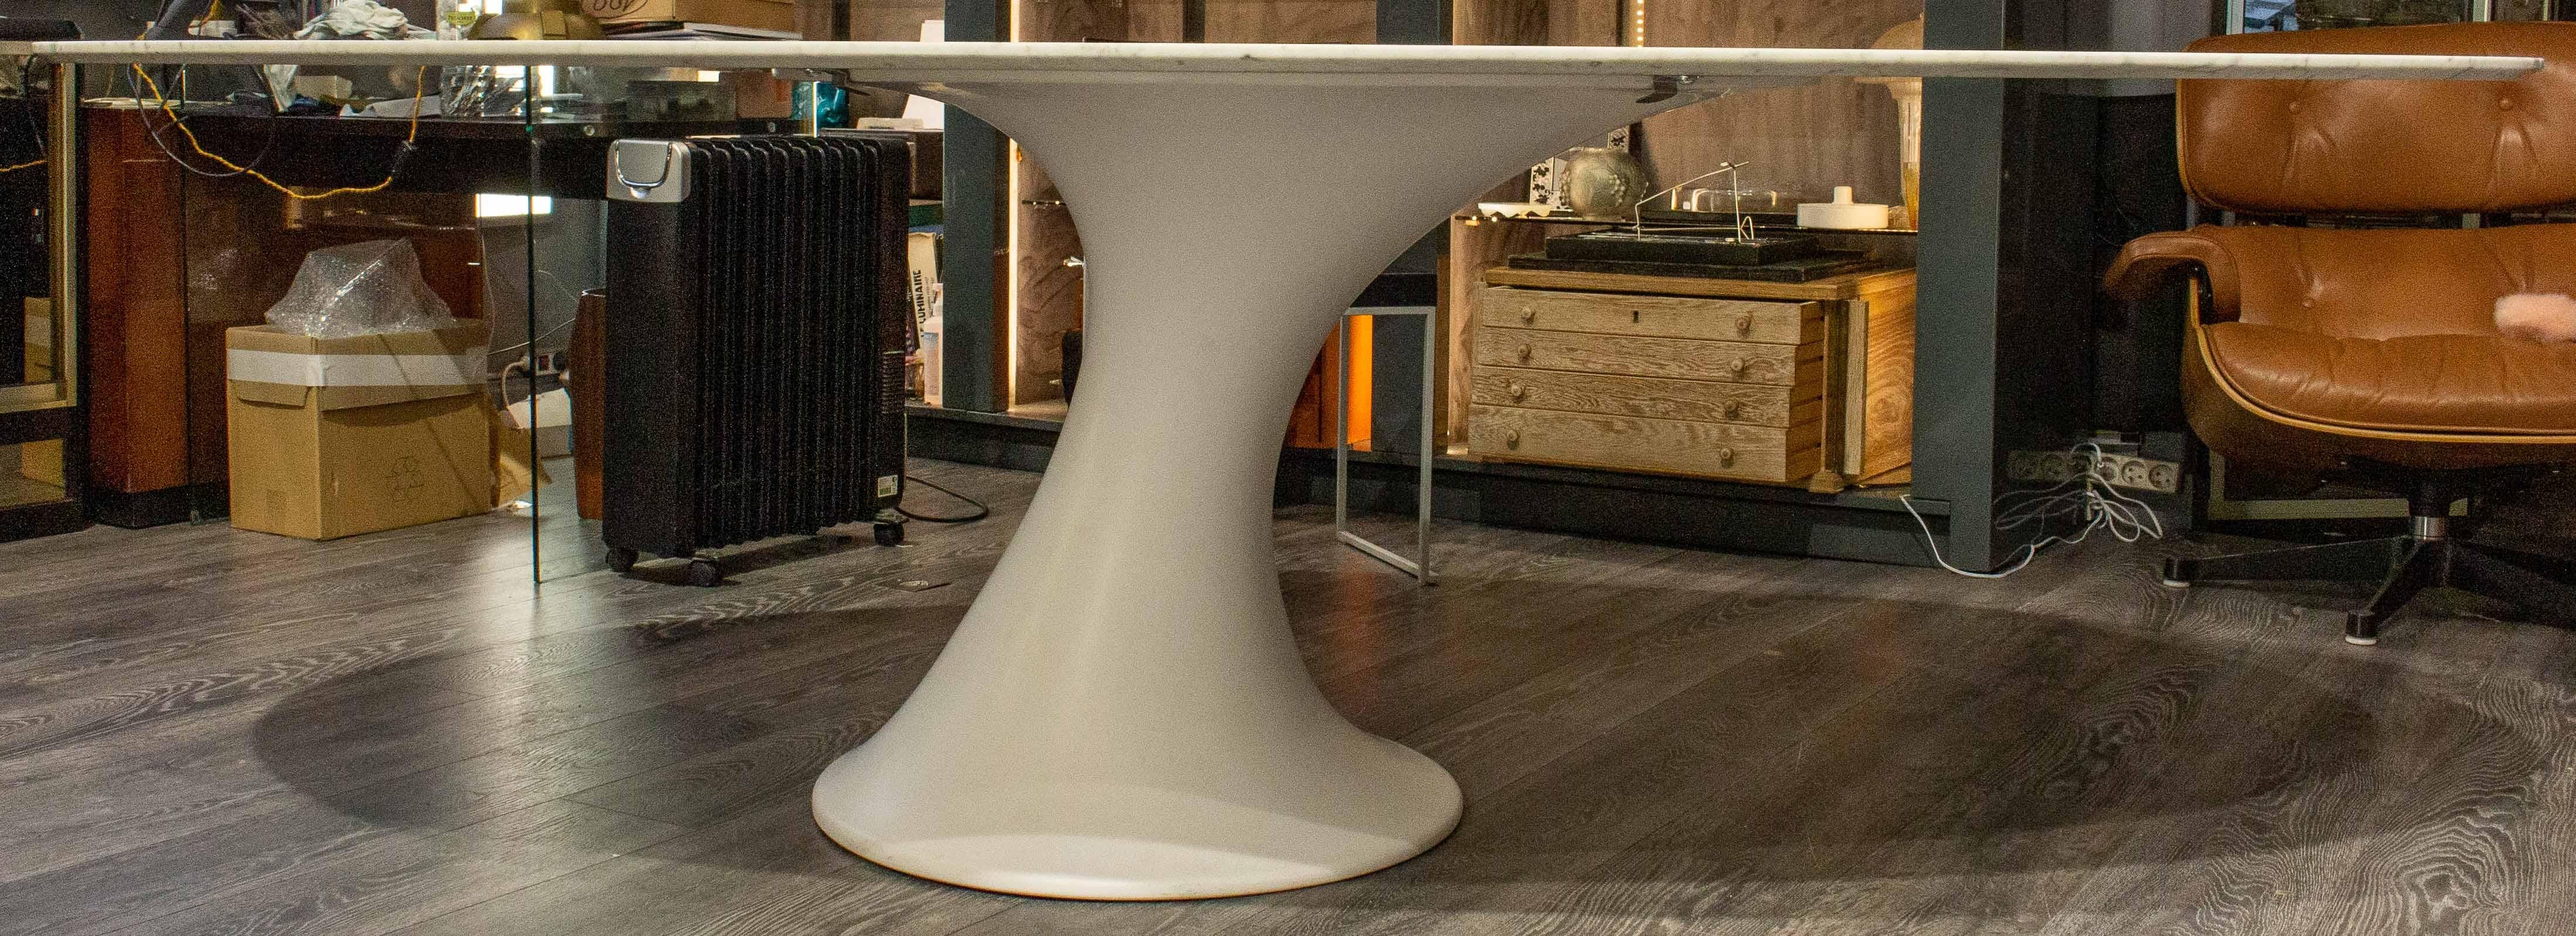 Reef is a table with oval top in white Carrara marble
Reef is a table with oval top in white Carrara marble with a refined line. This table combines the classicism of a marble top with a base with sinuous lines made of cristalplant, an innovative